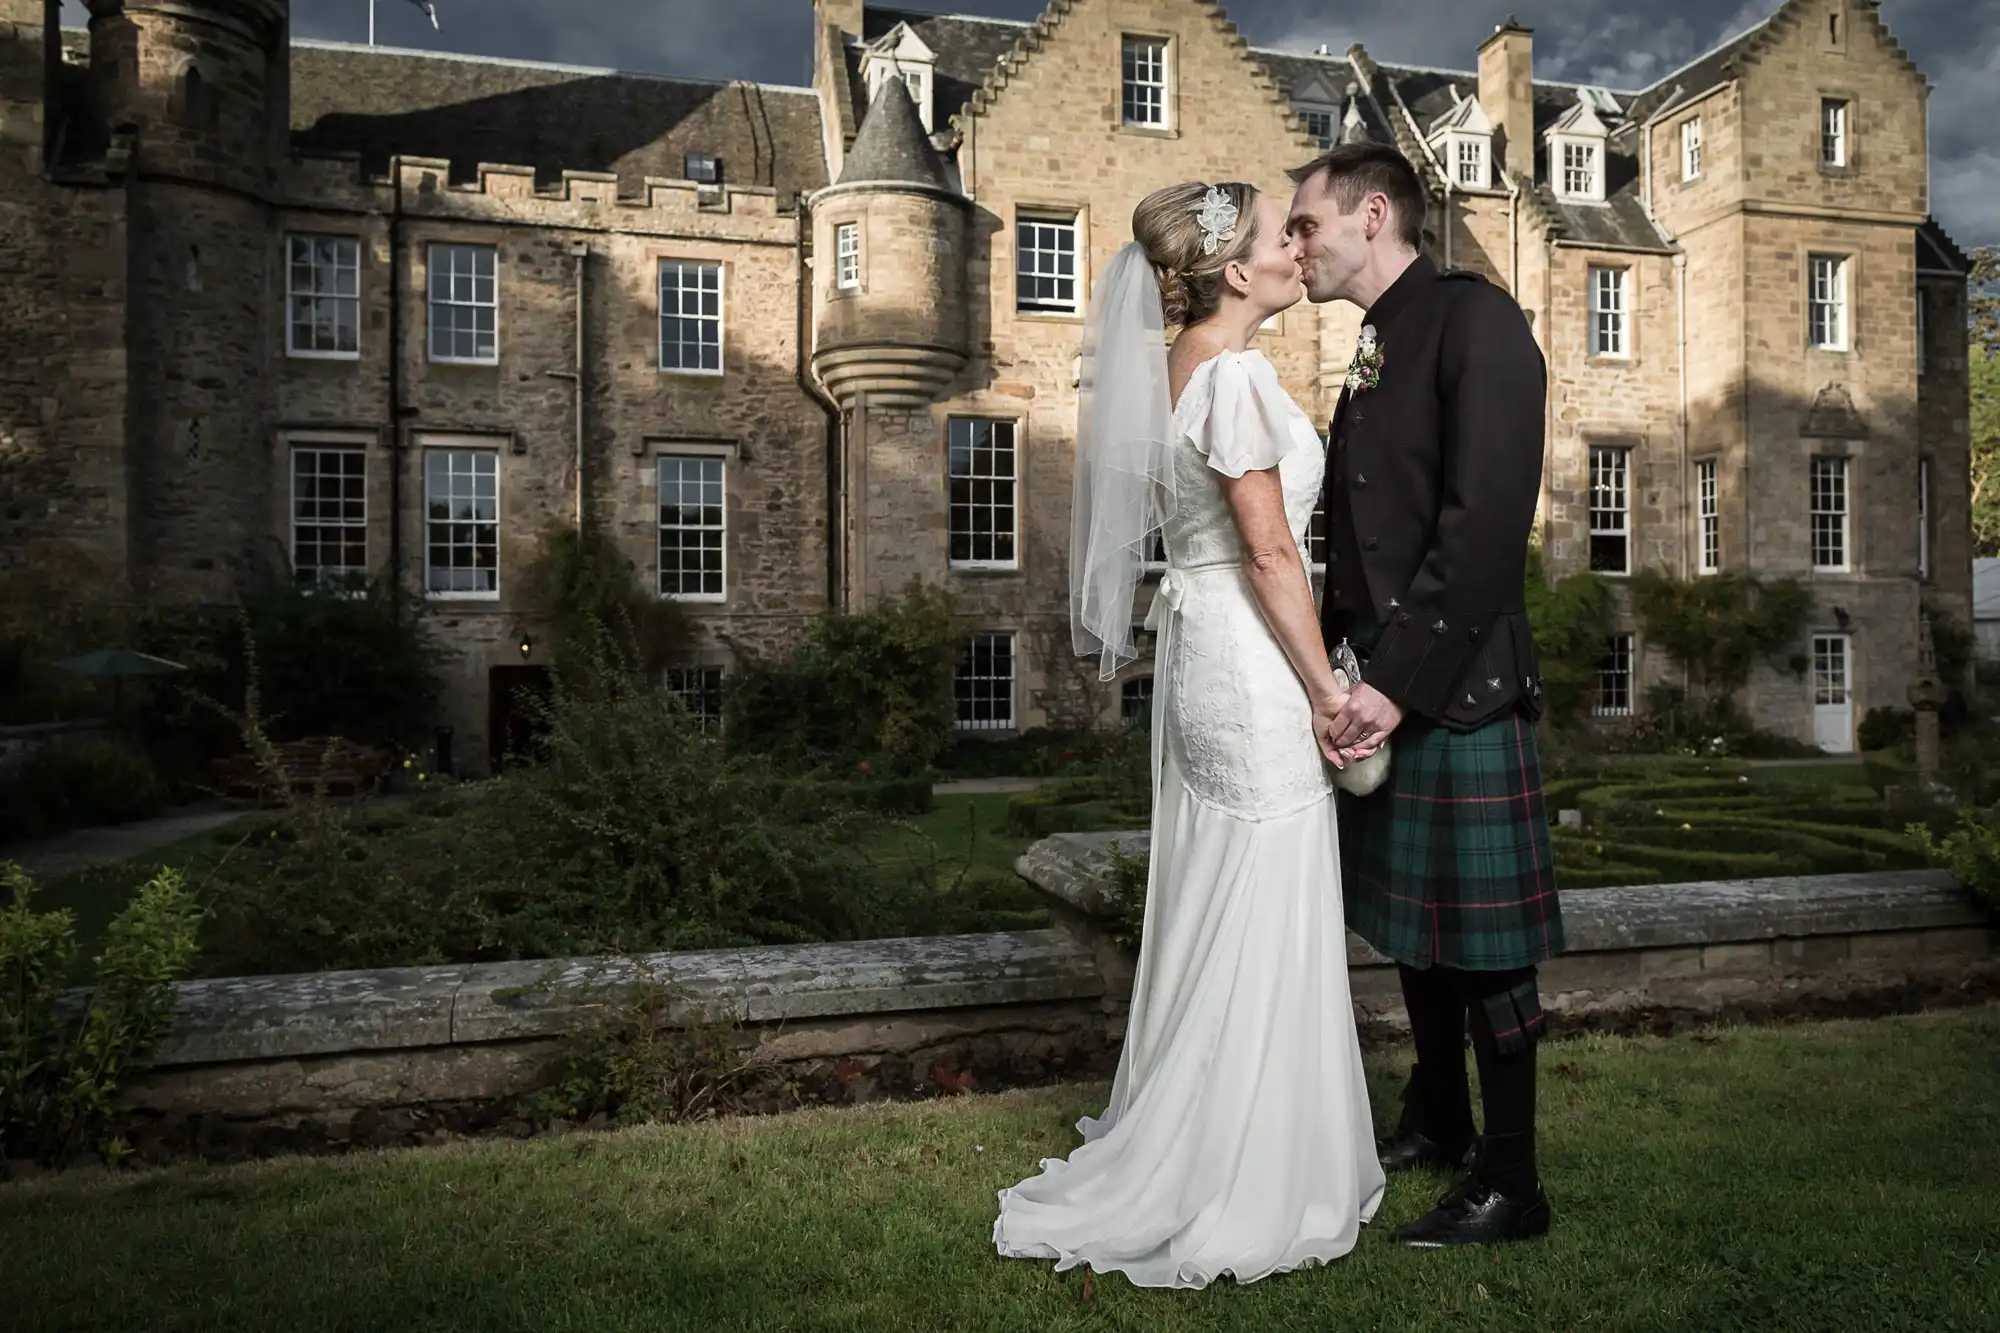 A bride in a white dress and a groom in a kilt kissing in front of an old castle with manicured gardens under a cloudy sky.